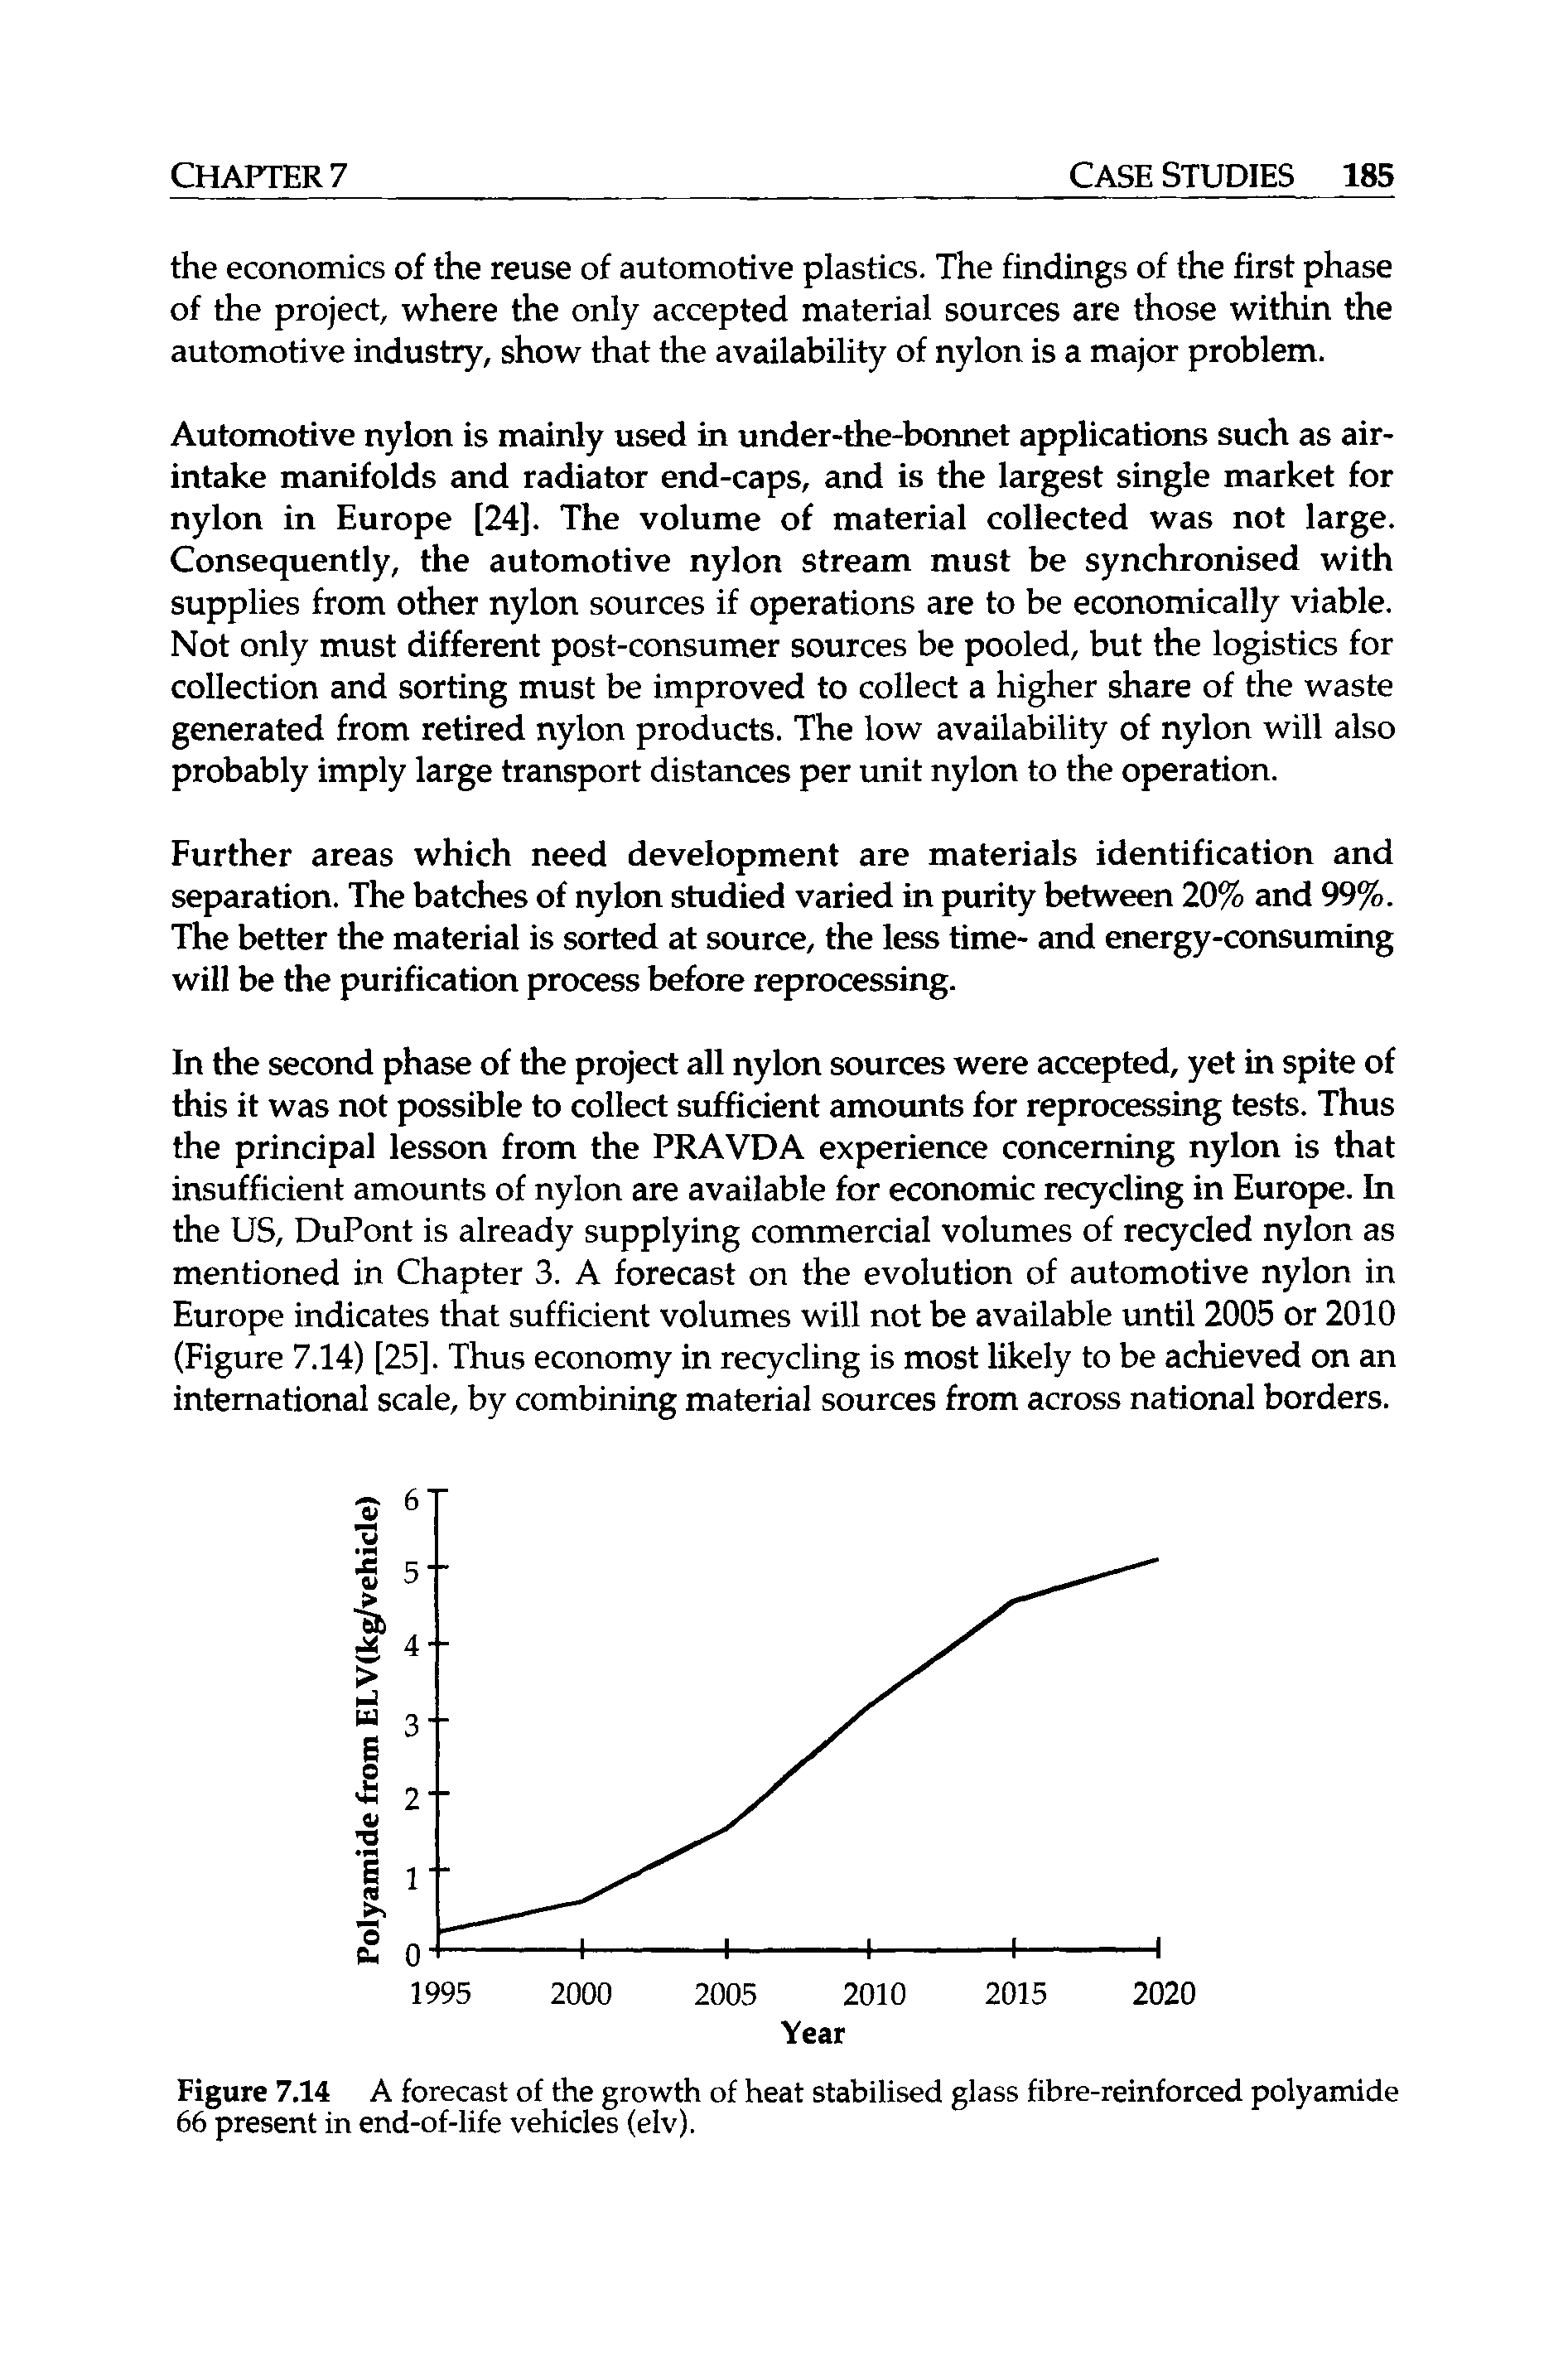 Figure 7,14 A forecast of the growth of heat stabilised glass fibre-reinforced polyamide 66 present in end-of-life vehicles (elv).